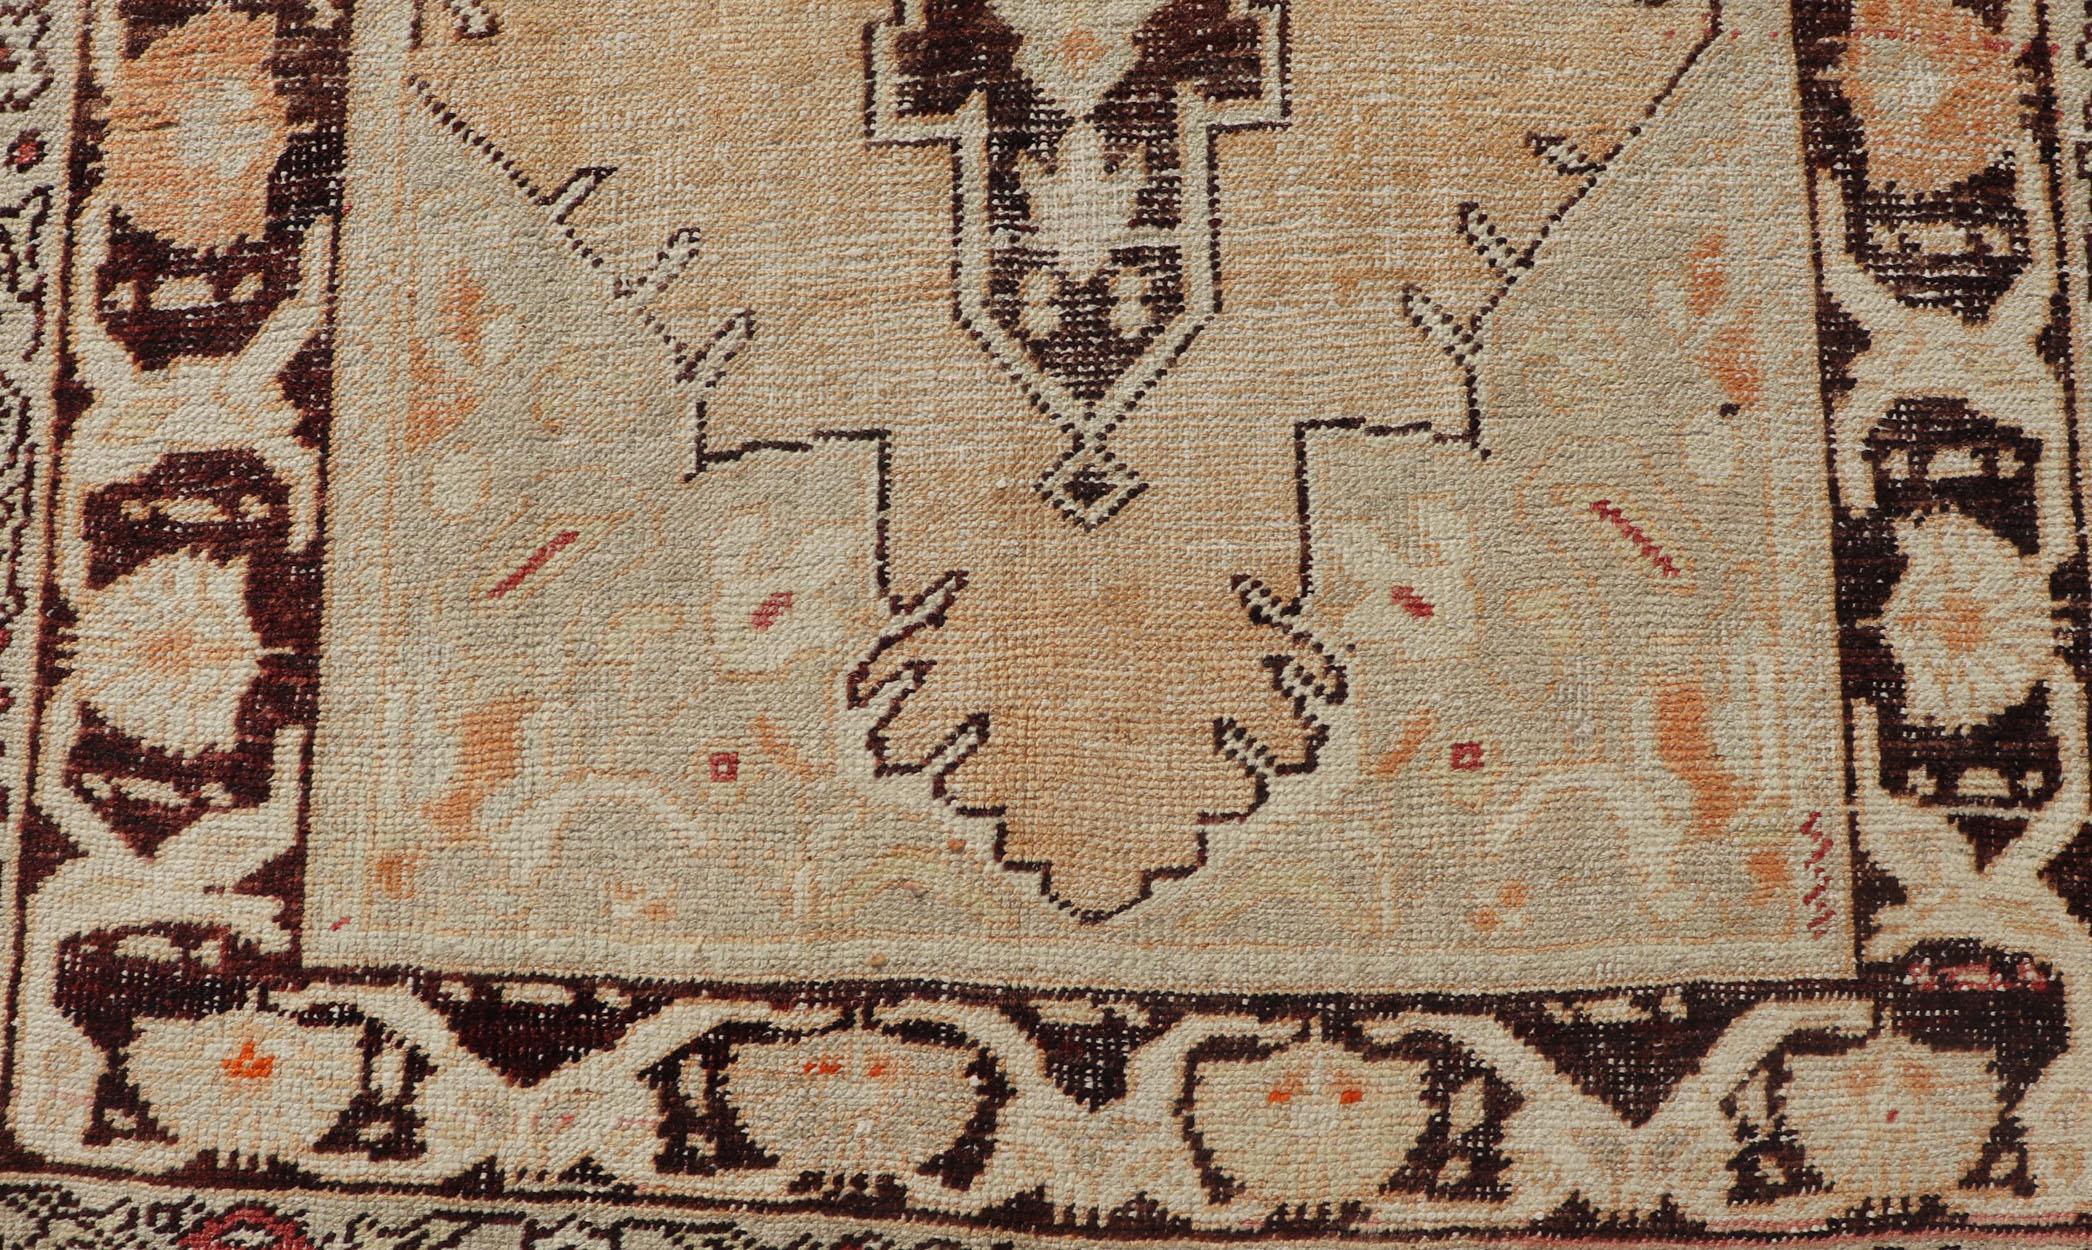 Vintage oushak from Turkey with Medallion design in various tones of orange, tan, sand, taupe, brown, and light green. Keivan Woven Arts / rug EN-176290, country of origin / type: Turkey / oushak, circa 1940. 


Measures: 4'7 x 8.